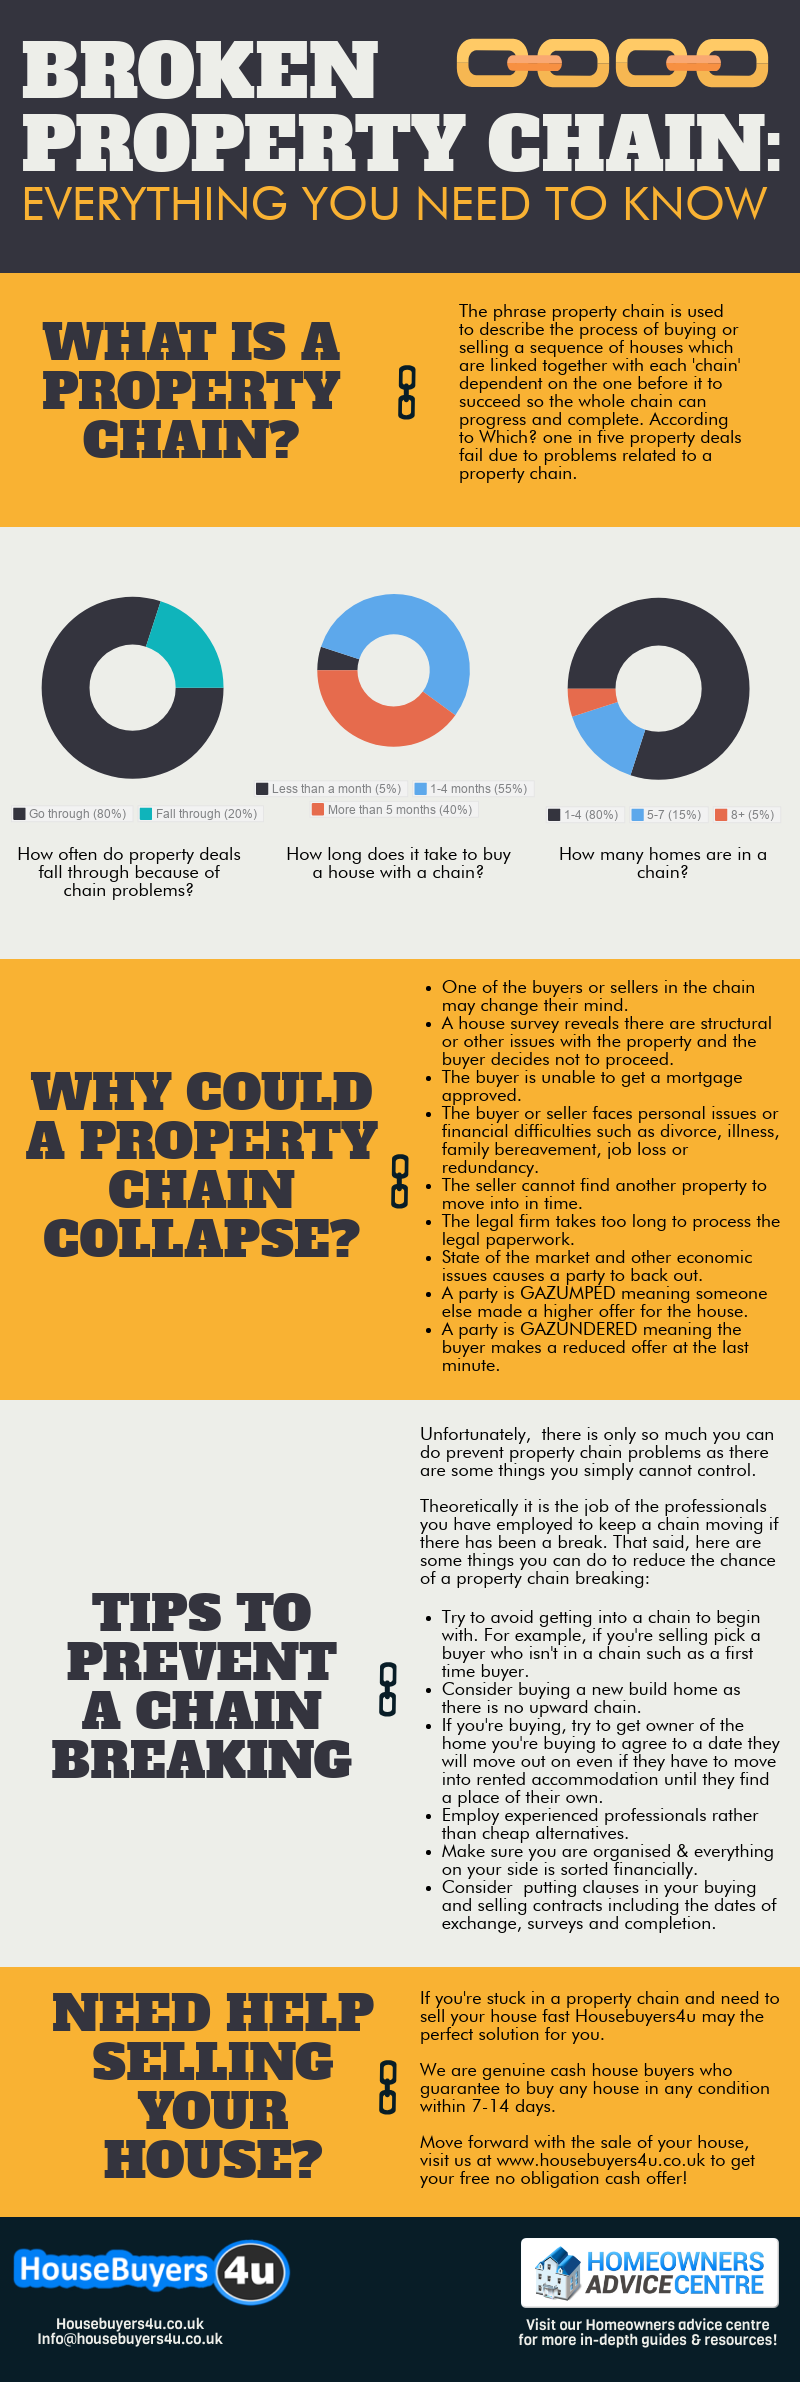 Broken property chain, everything you need to know infographic